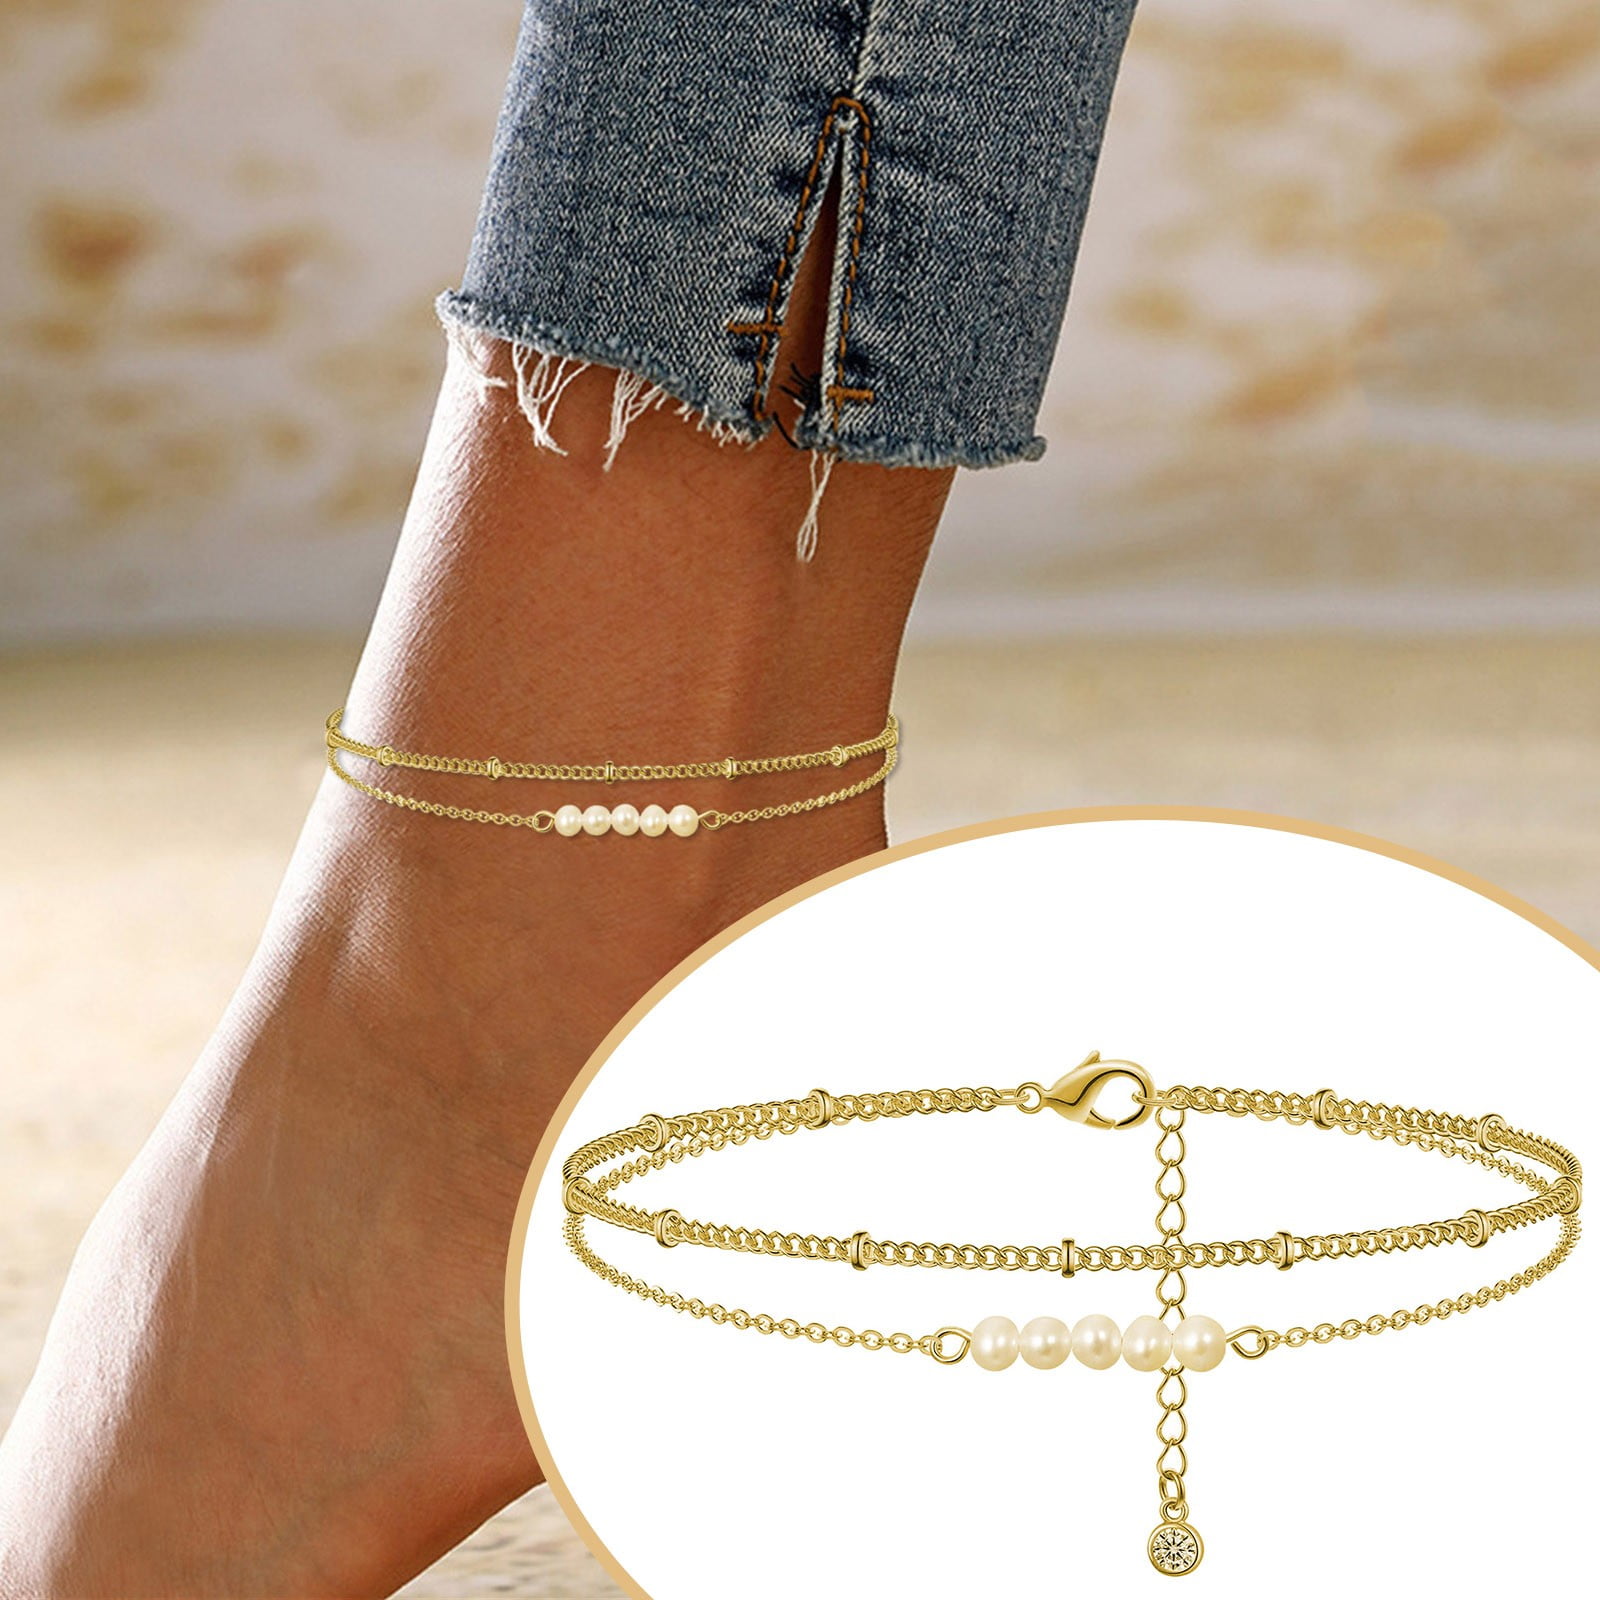 keusn boho double layer gold anklets for women pearl beads pendant foot  chains beach bracelet anklets ankle bracelet h